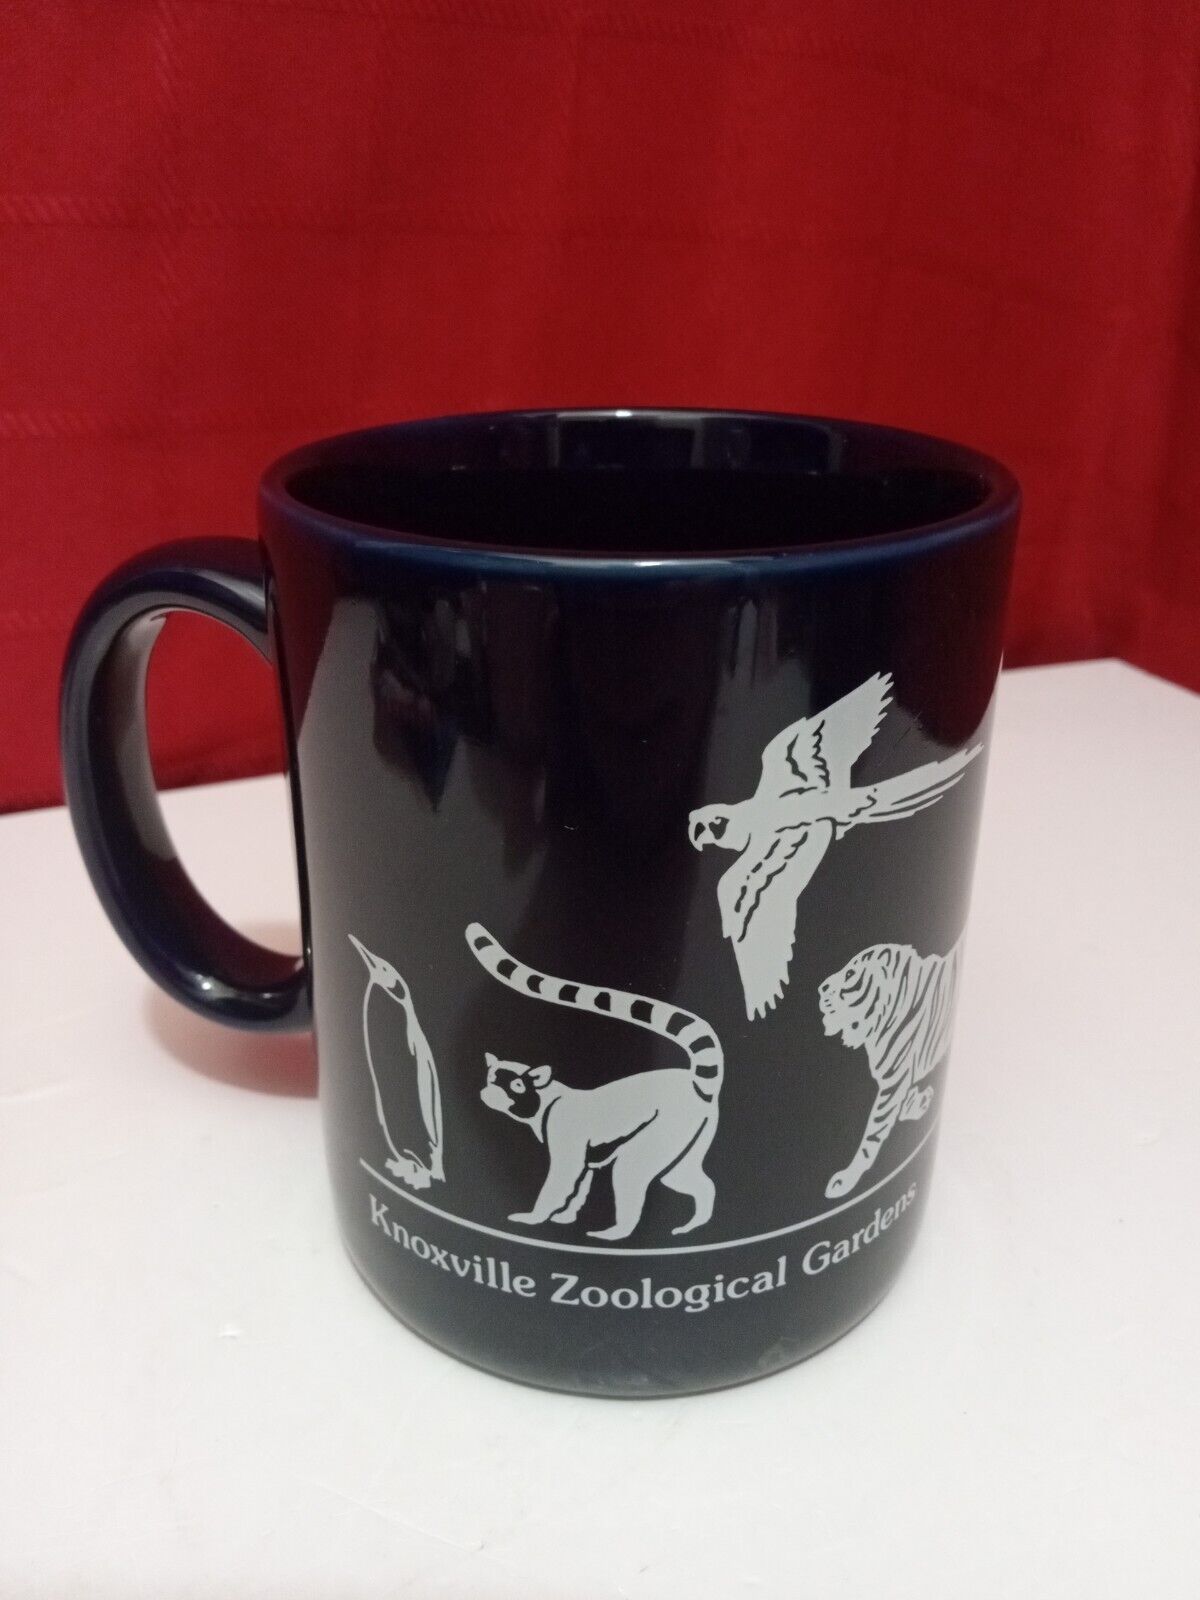 Knoxville TN ZOOLOGICAL GARDENS Zoo Coffee Mug BLUE ANIMALS